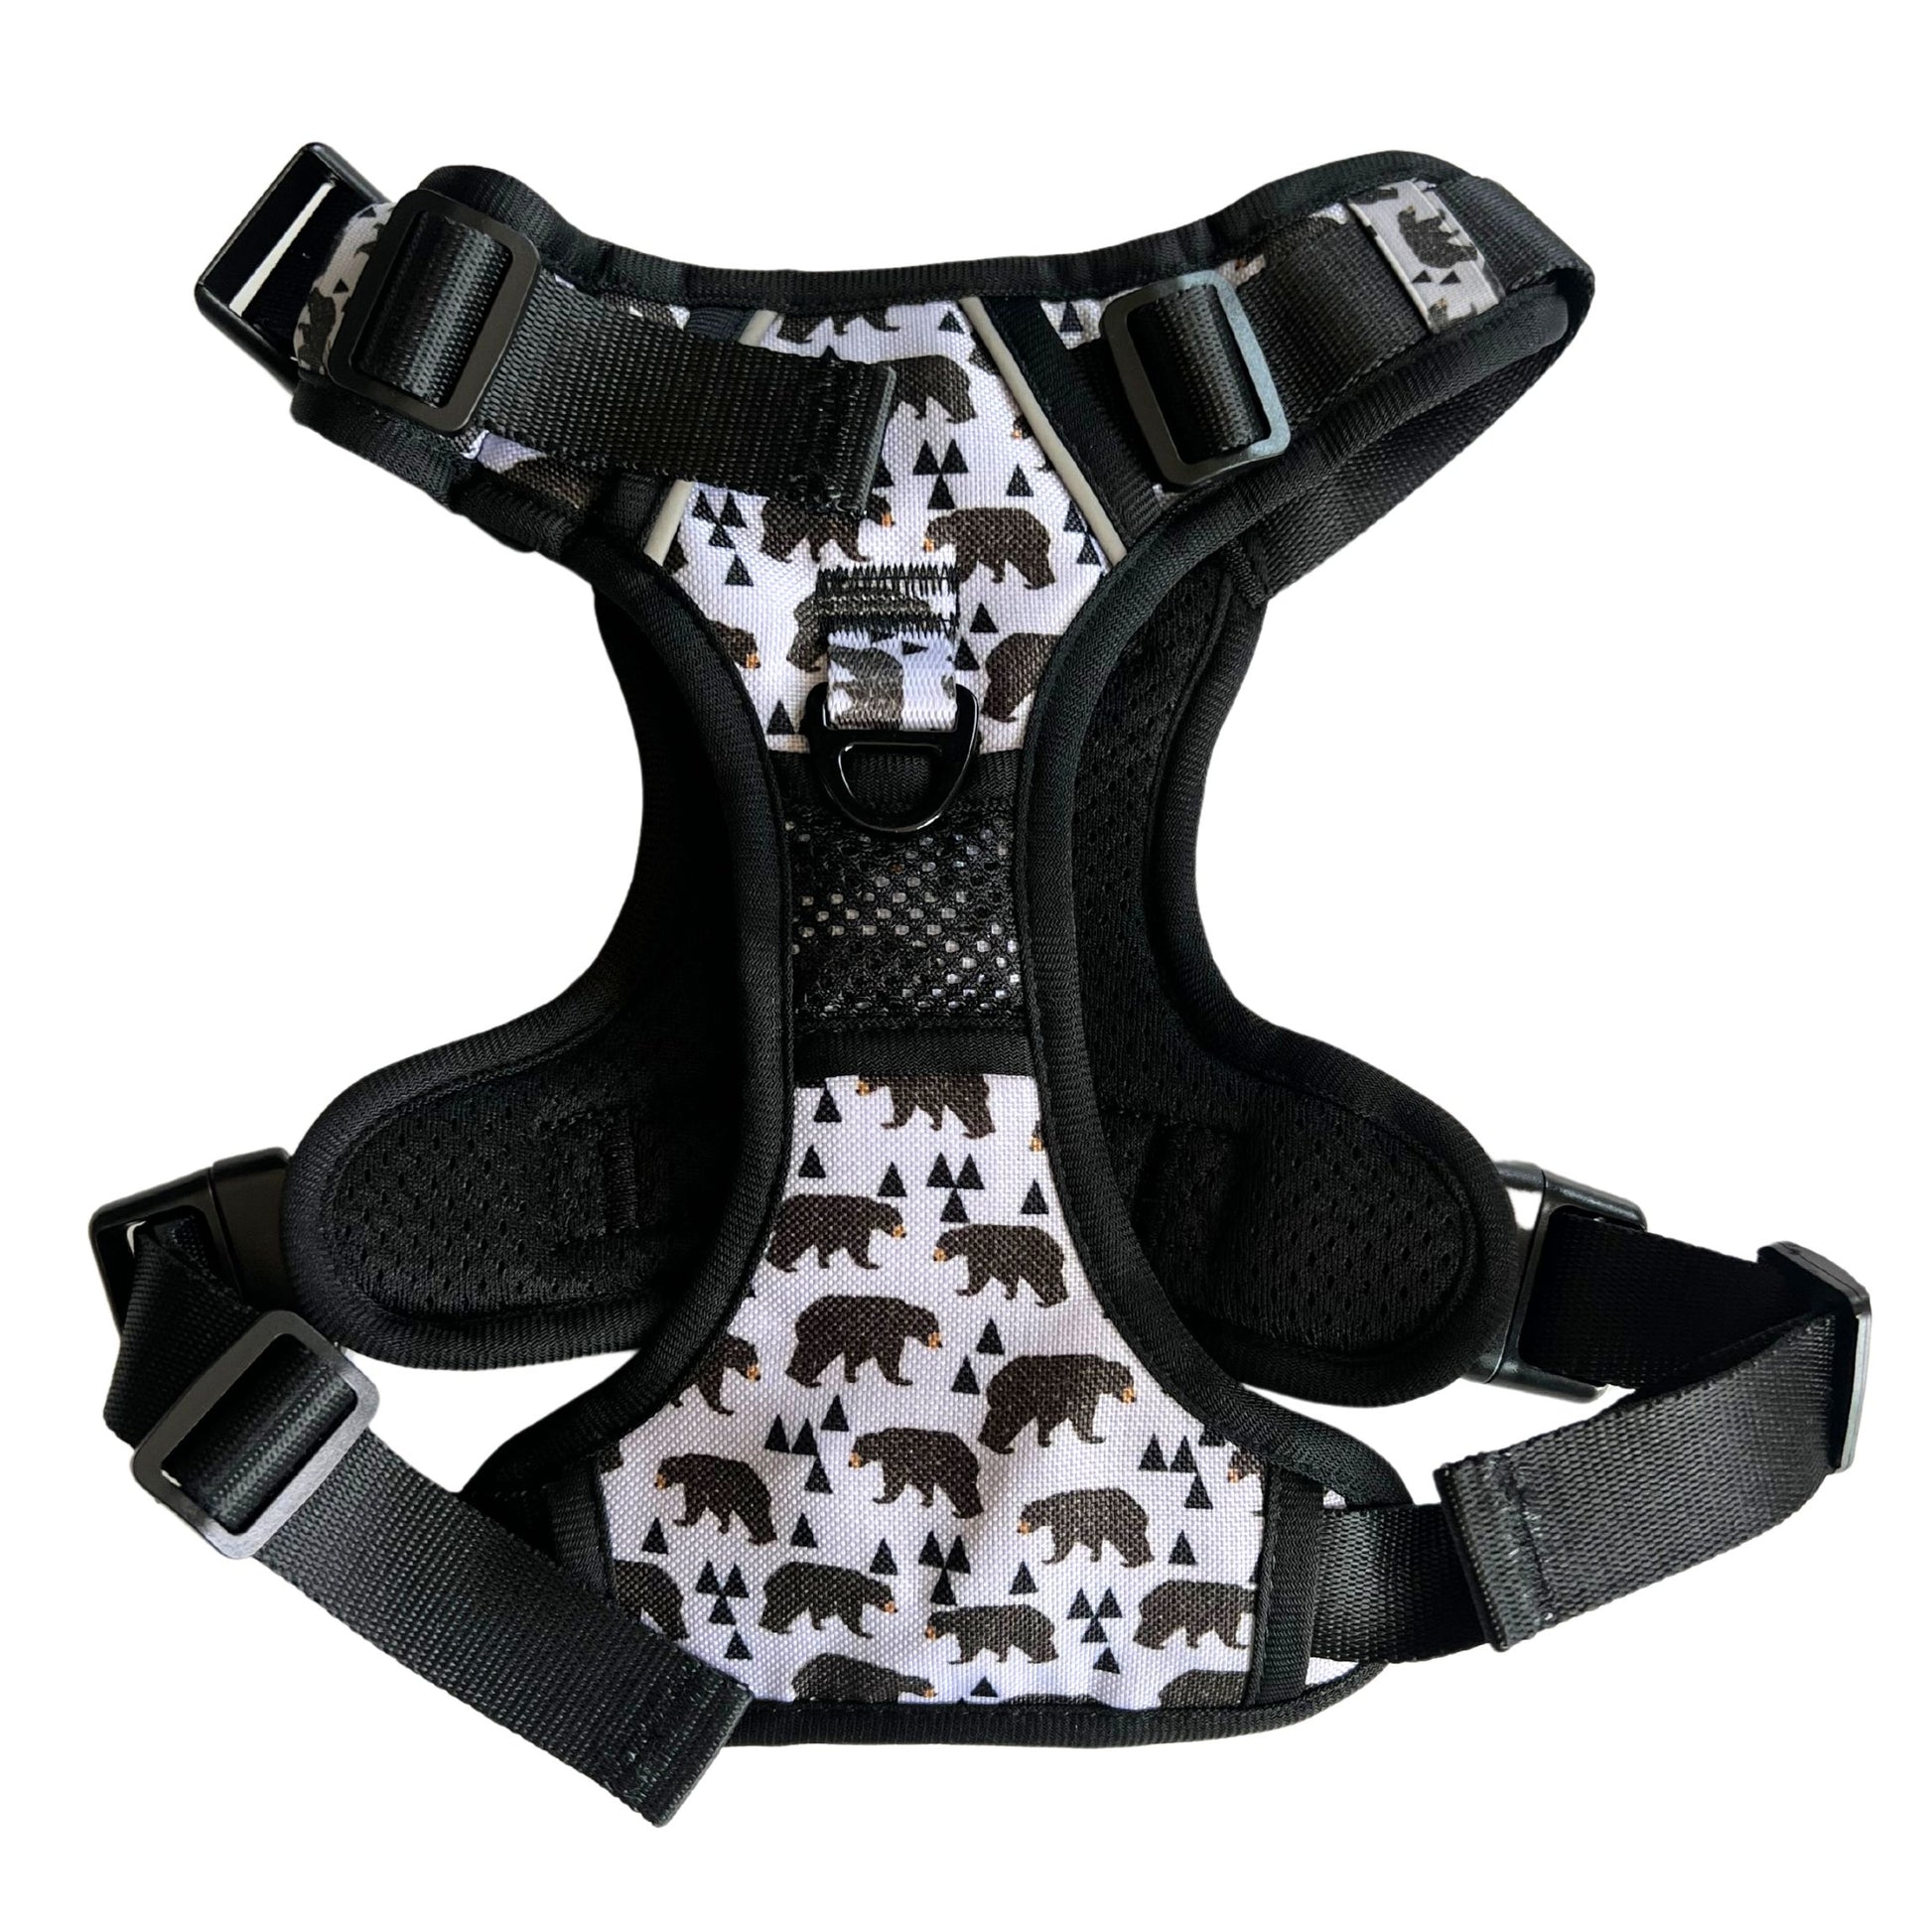 Wildside dog gear, dog harness leash dog harness lead dog harness small dog harness durable dog harness easy to put on dog harness size chart by weight dog harness with leash dog harness with handle for large dogs dog harness outdoor dog harness step in dog harness sizes dog harness jack russell, dog harness double clip dog harness 50 pounds dog harness not over head dog harness to help them walk, front harness vs back harness